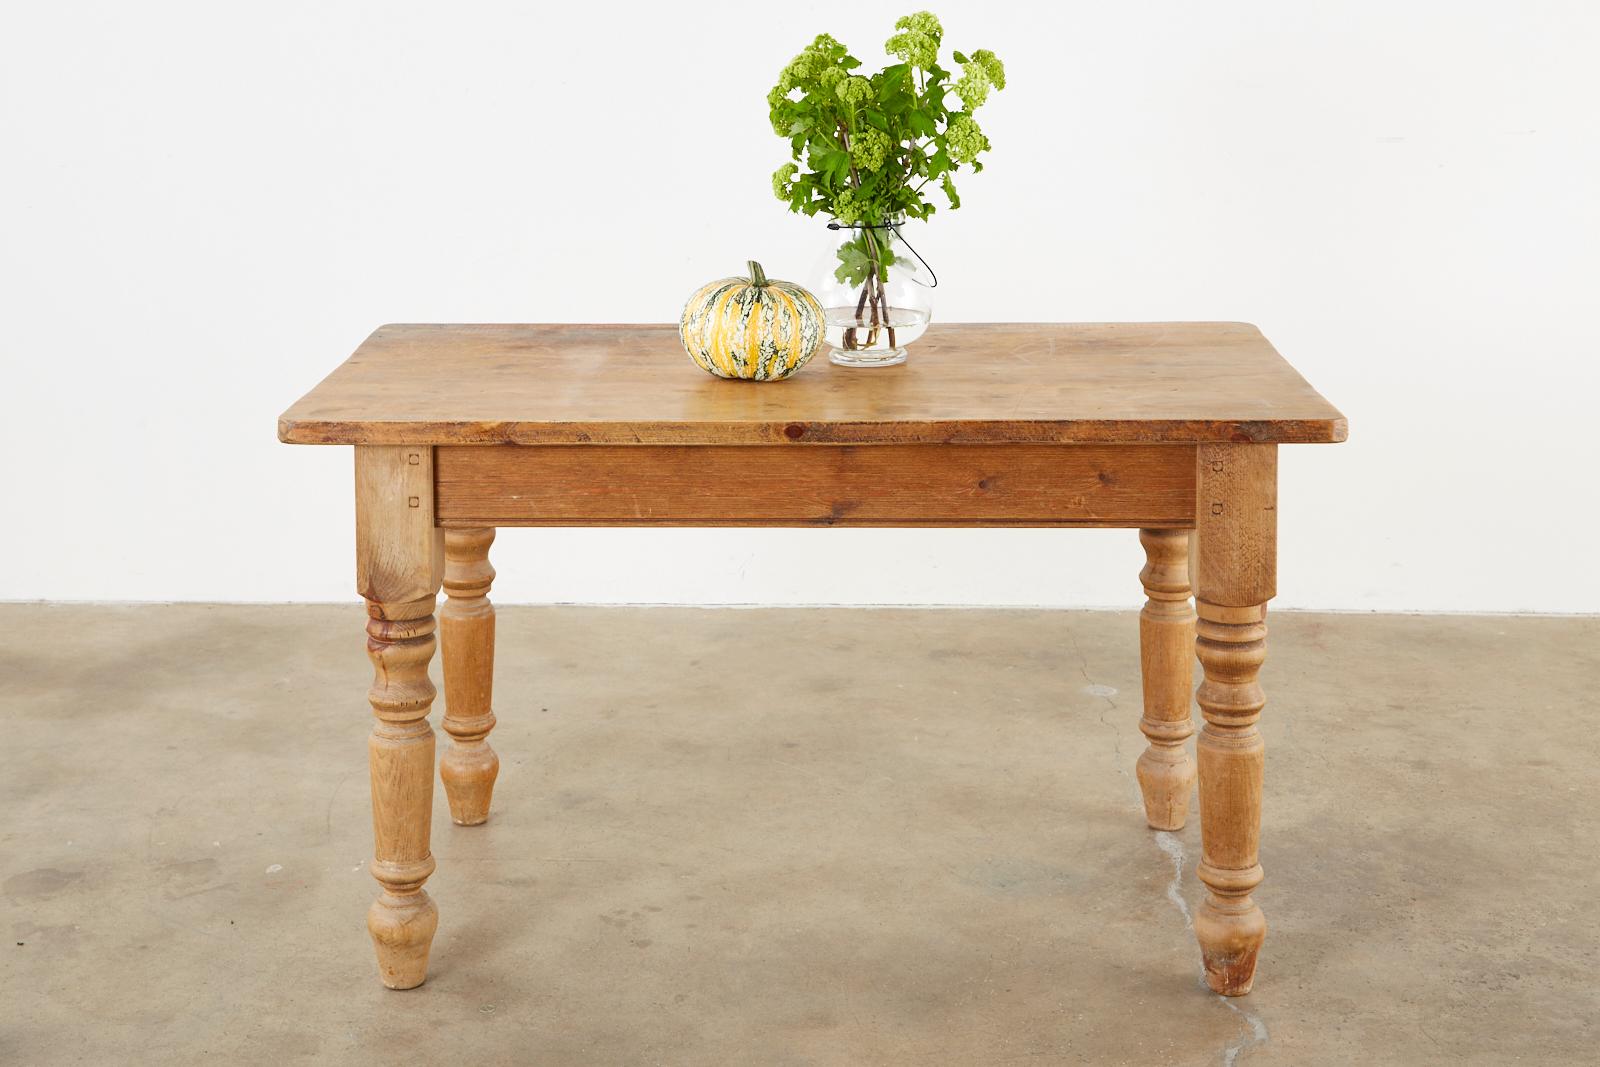 Rustic country English farmhouse dining table or harvest table featuring a 1.25 thick pine plank top. Constructed with wood peg joinery on the legs and modern updates underneath to make it very strong and stable. Supported by thick, chunky turned